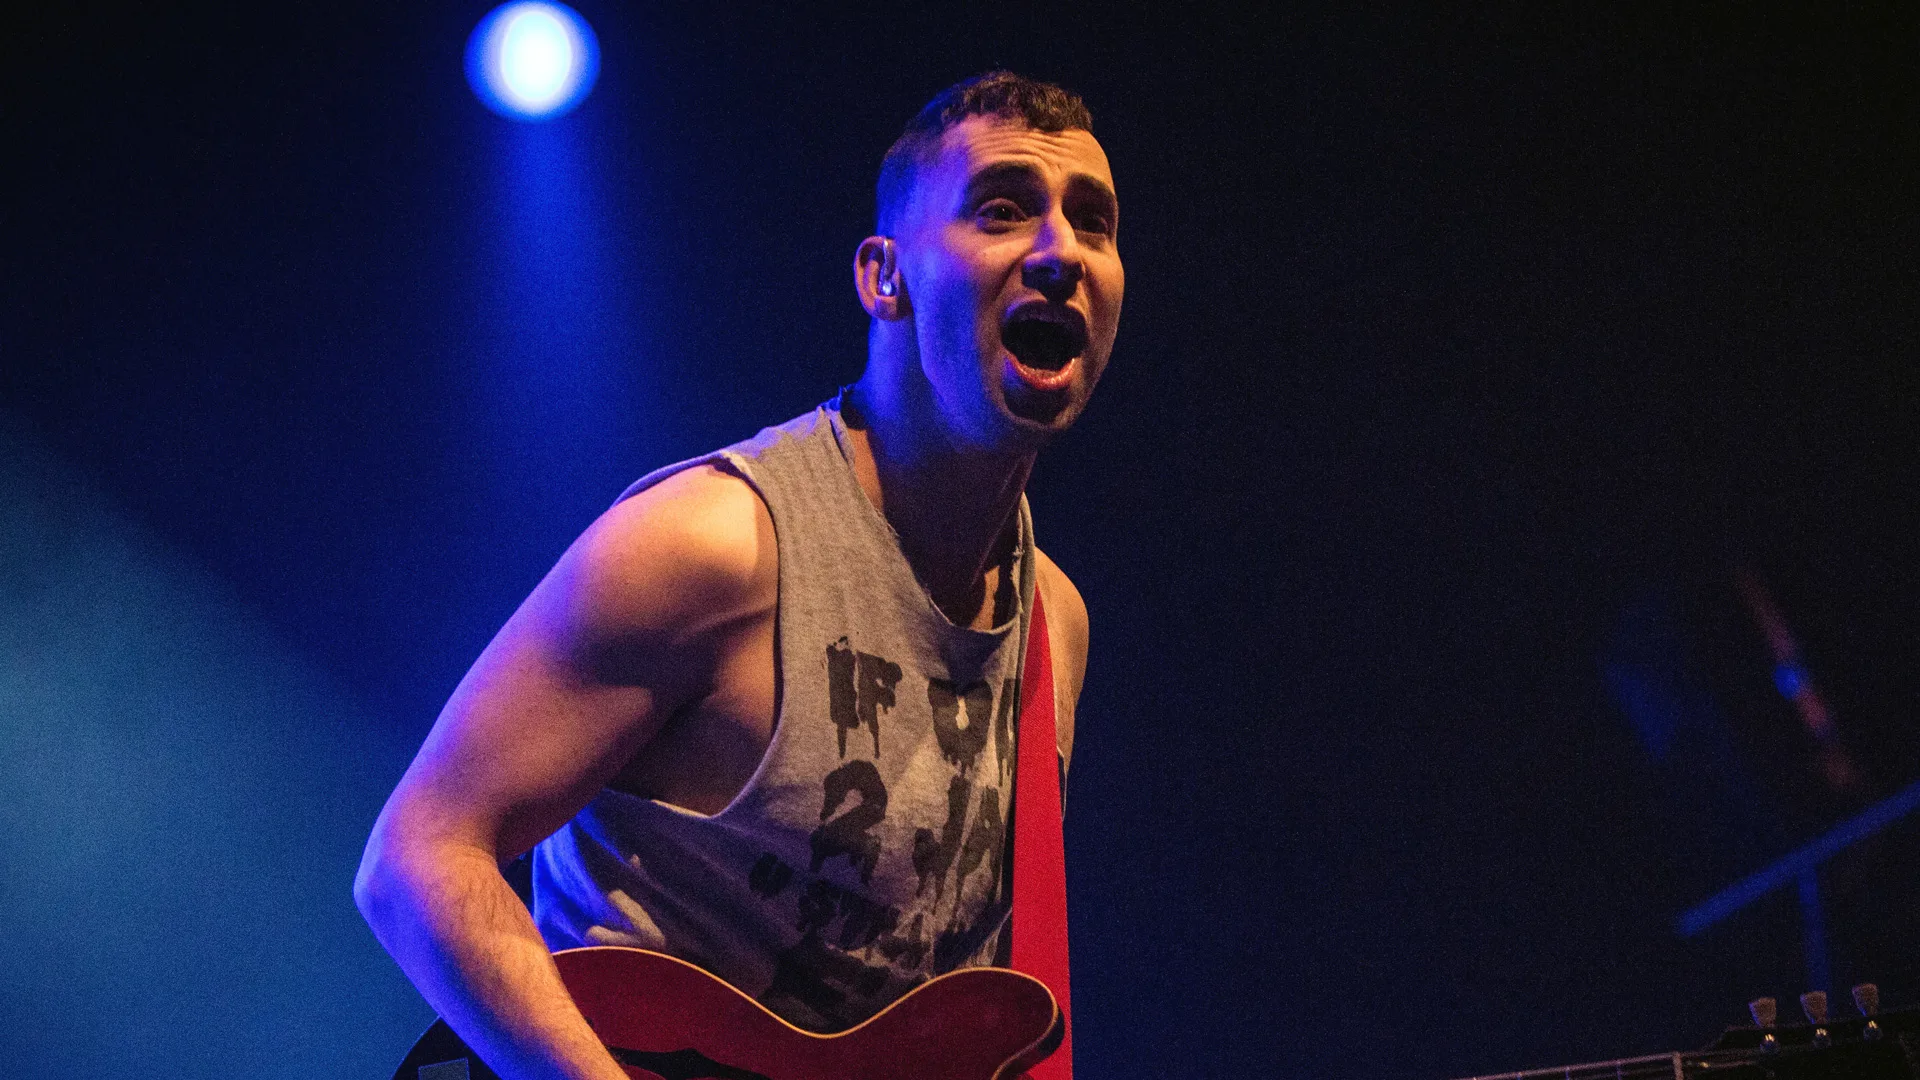 A photograph of the lead singer of The Bleachers performing on stage with a purple light shining on his face.